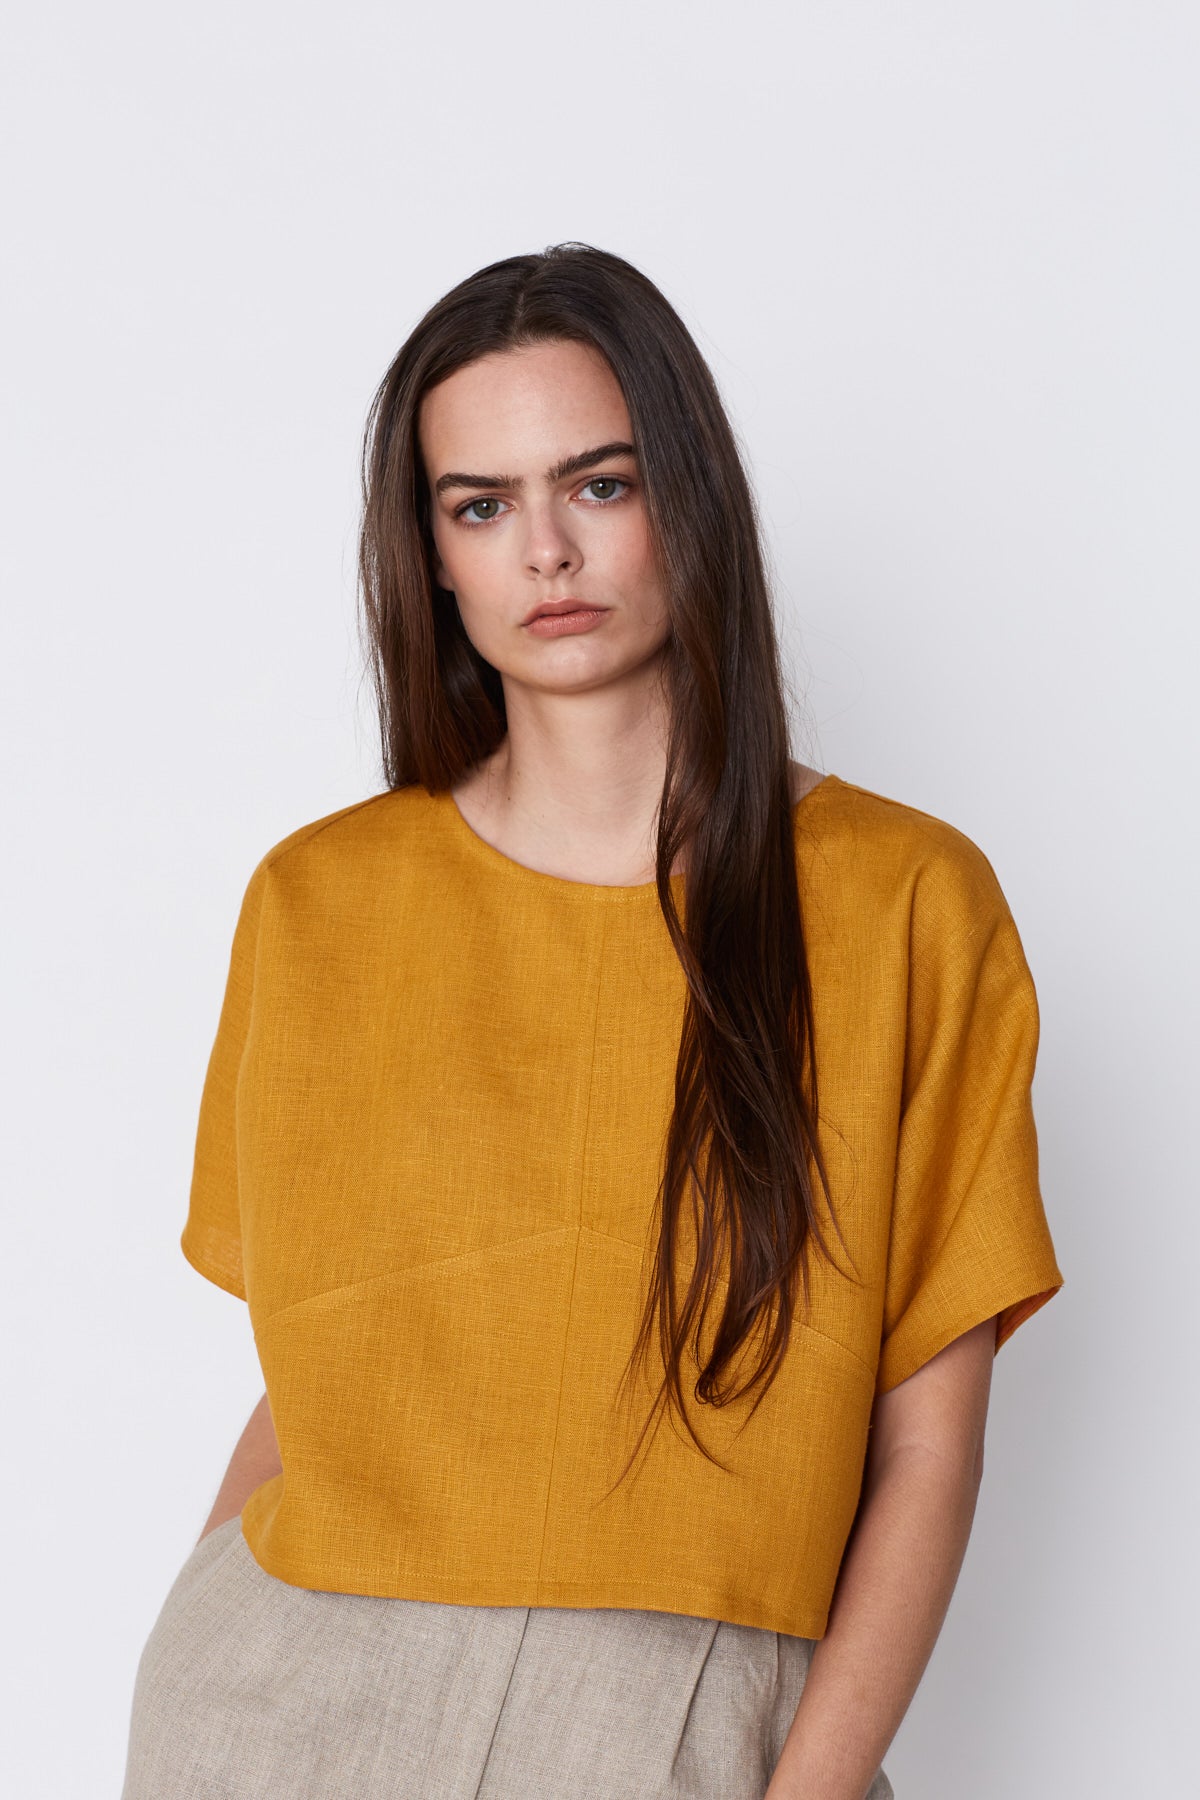 Linz Top with pockets in Mango Linen. Made in Atlanta, ethically and sustainably, by slow fashion designer Megan Huntz. 